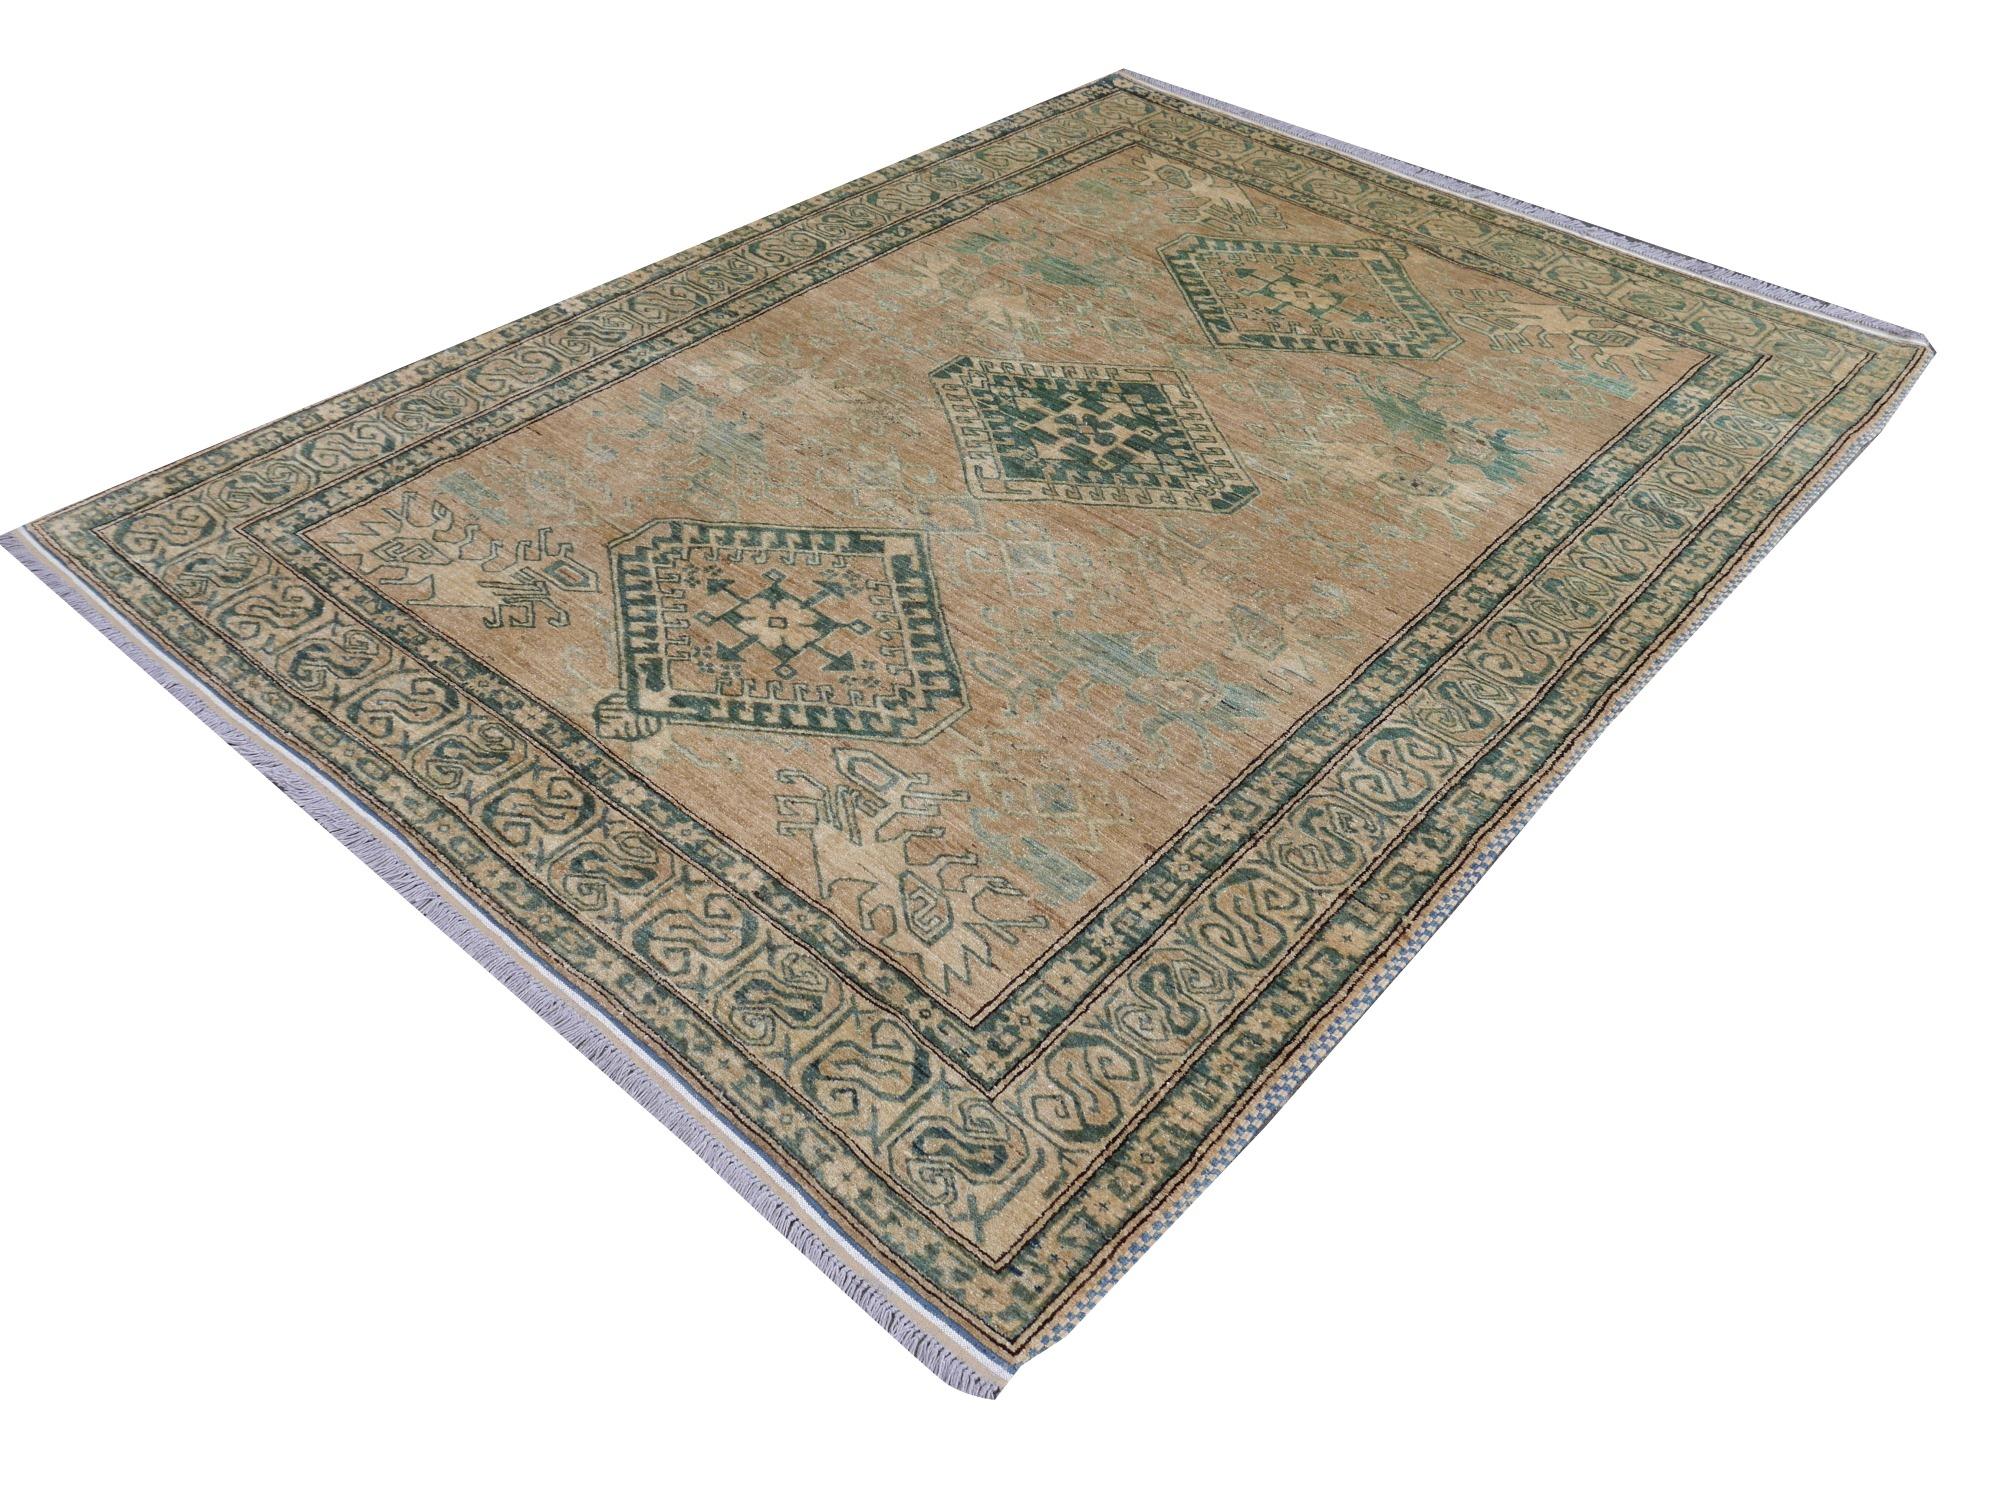 A beautiful vintage rug with Kazak Style Design

Design in style of Kazak hand-knotted.
Colors: Brown, beige, teal, blue 
Pile: 100% highland wool
Size: 8 x 6 ft
Made in Afghansitan

Perfect for loft or Industrial modern rooms. Looks fantastic on